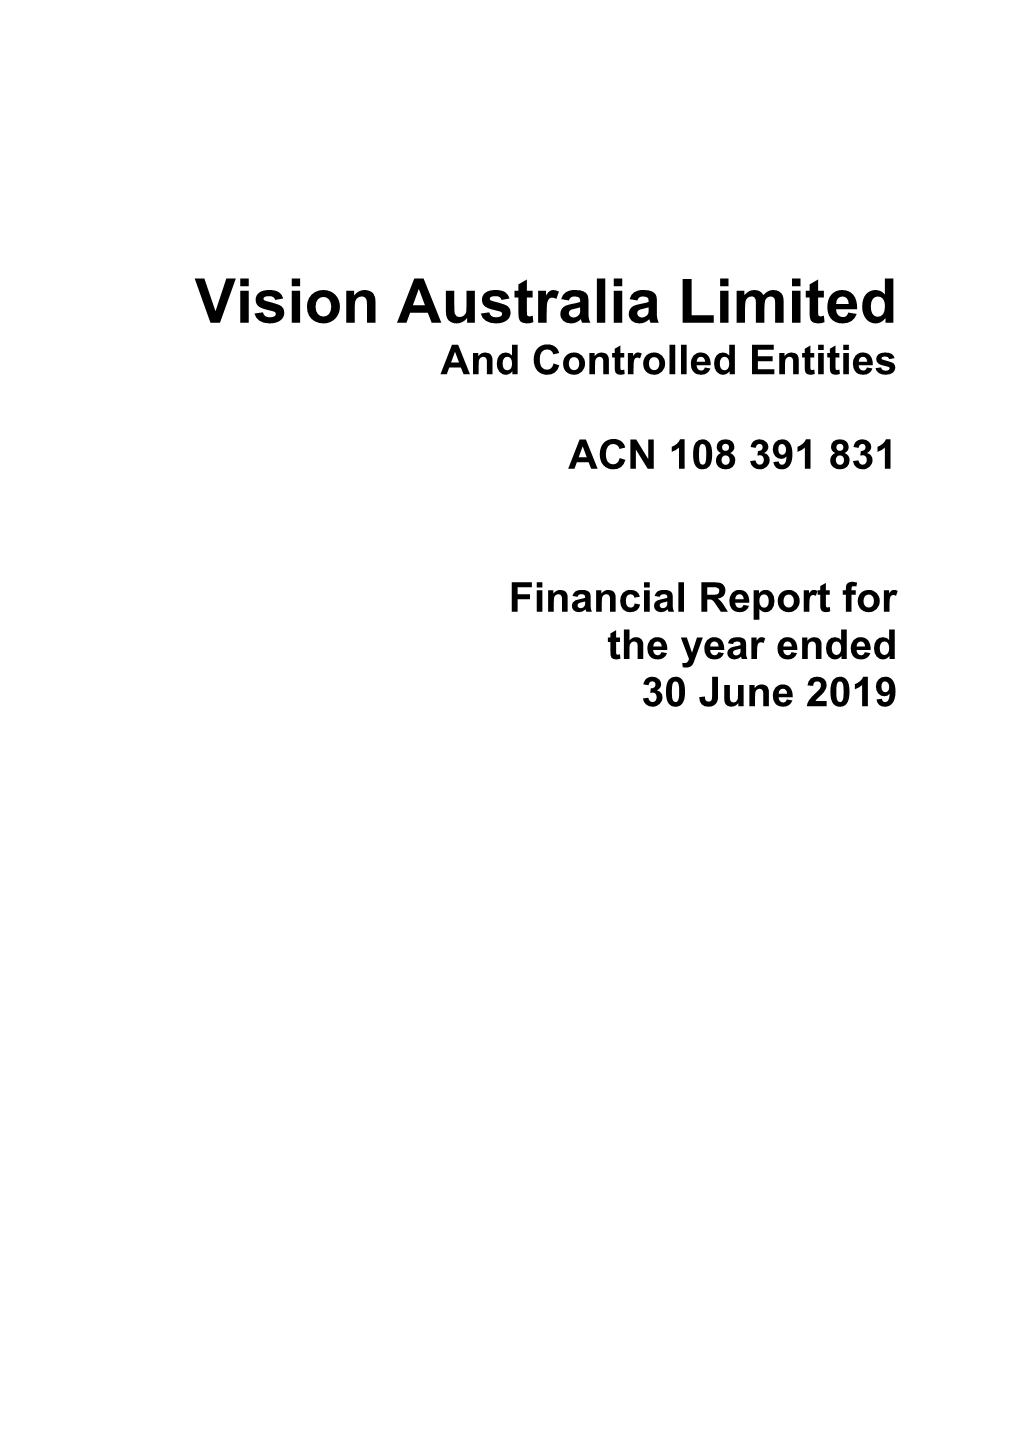 Vision Australia Limited and Controlled Entities